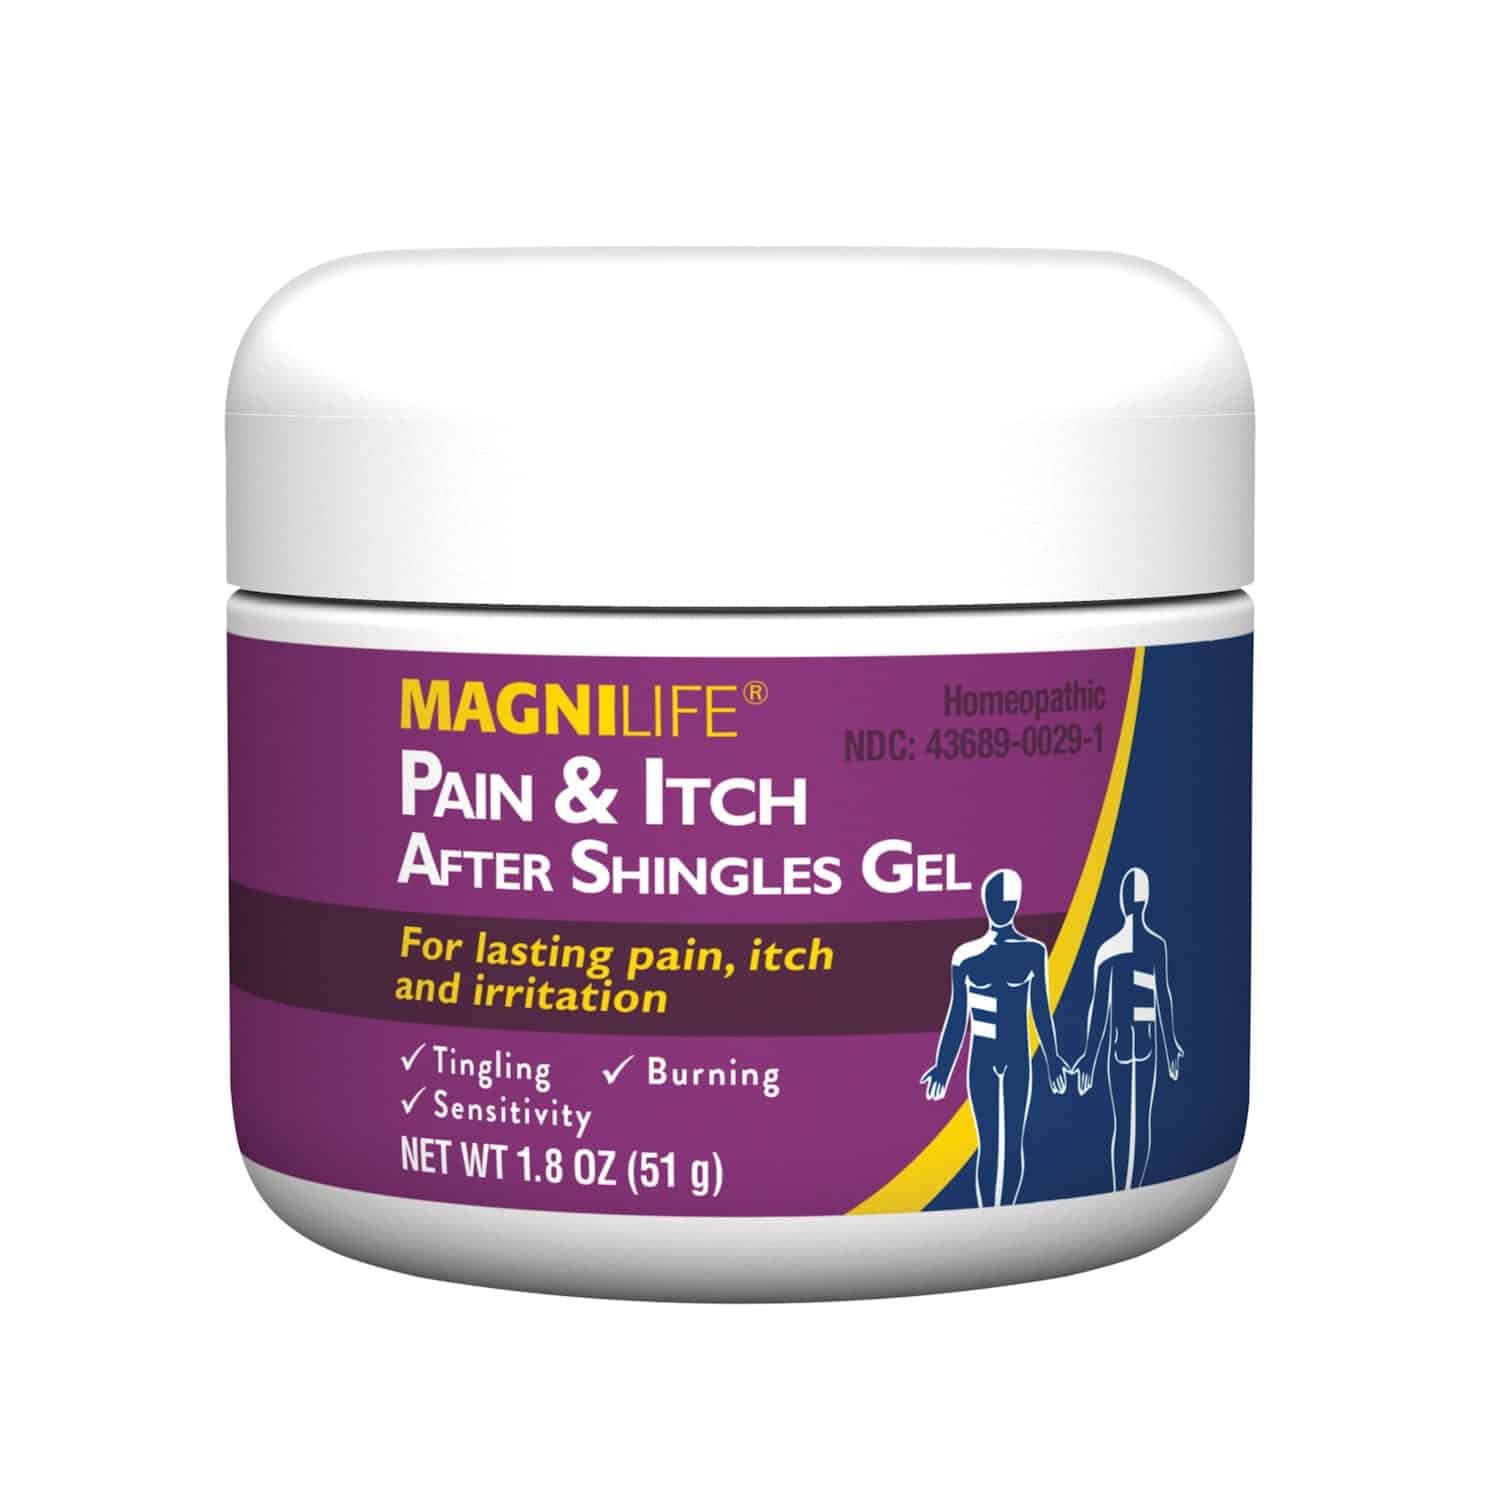 MagniLifeÂ® Pain &  Itch After Shingles Gel